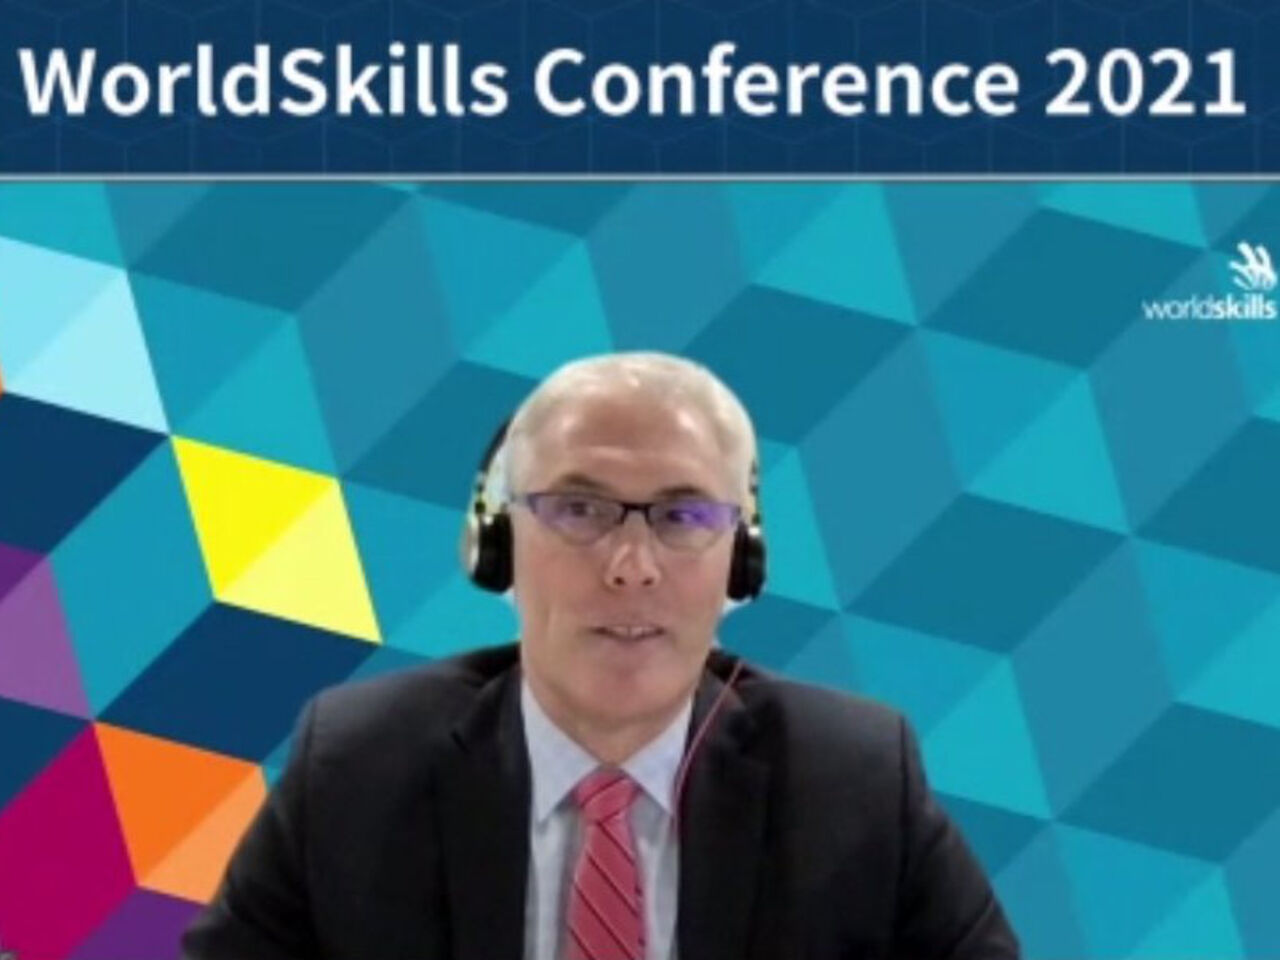 WorldSkills Conference 2021 closes with a call to action